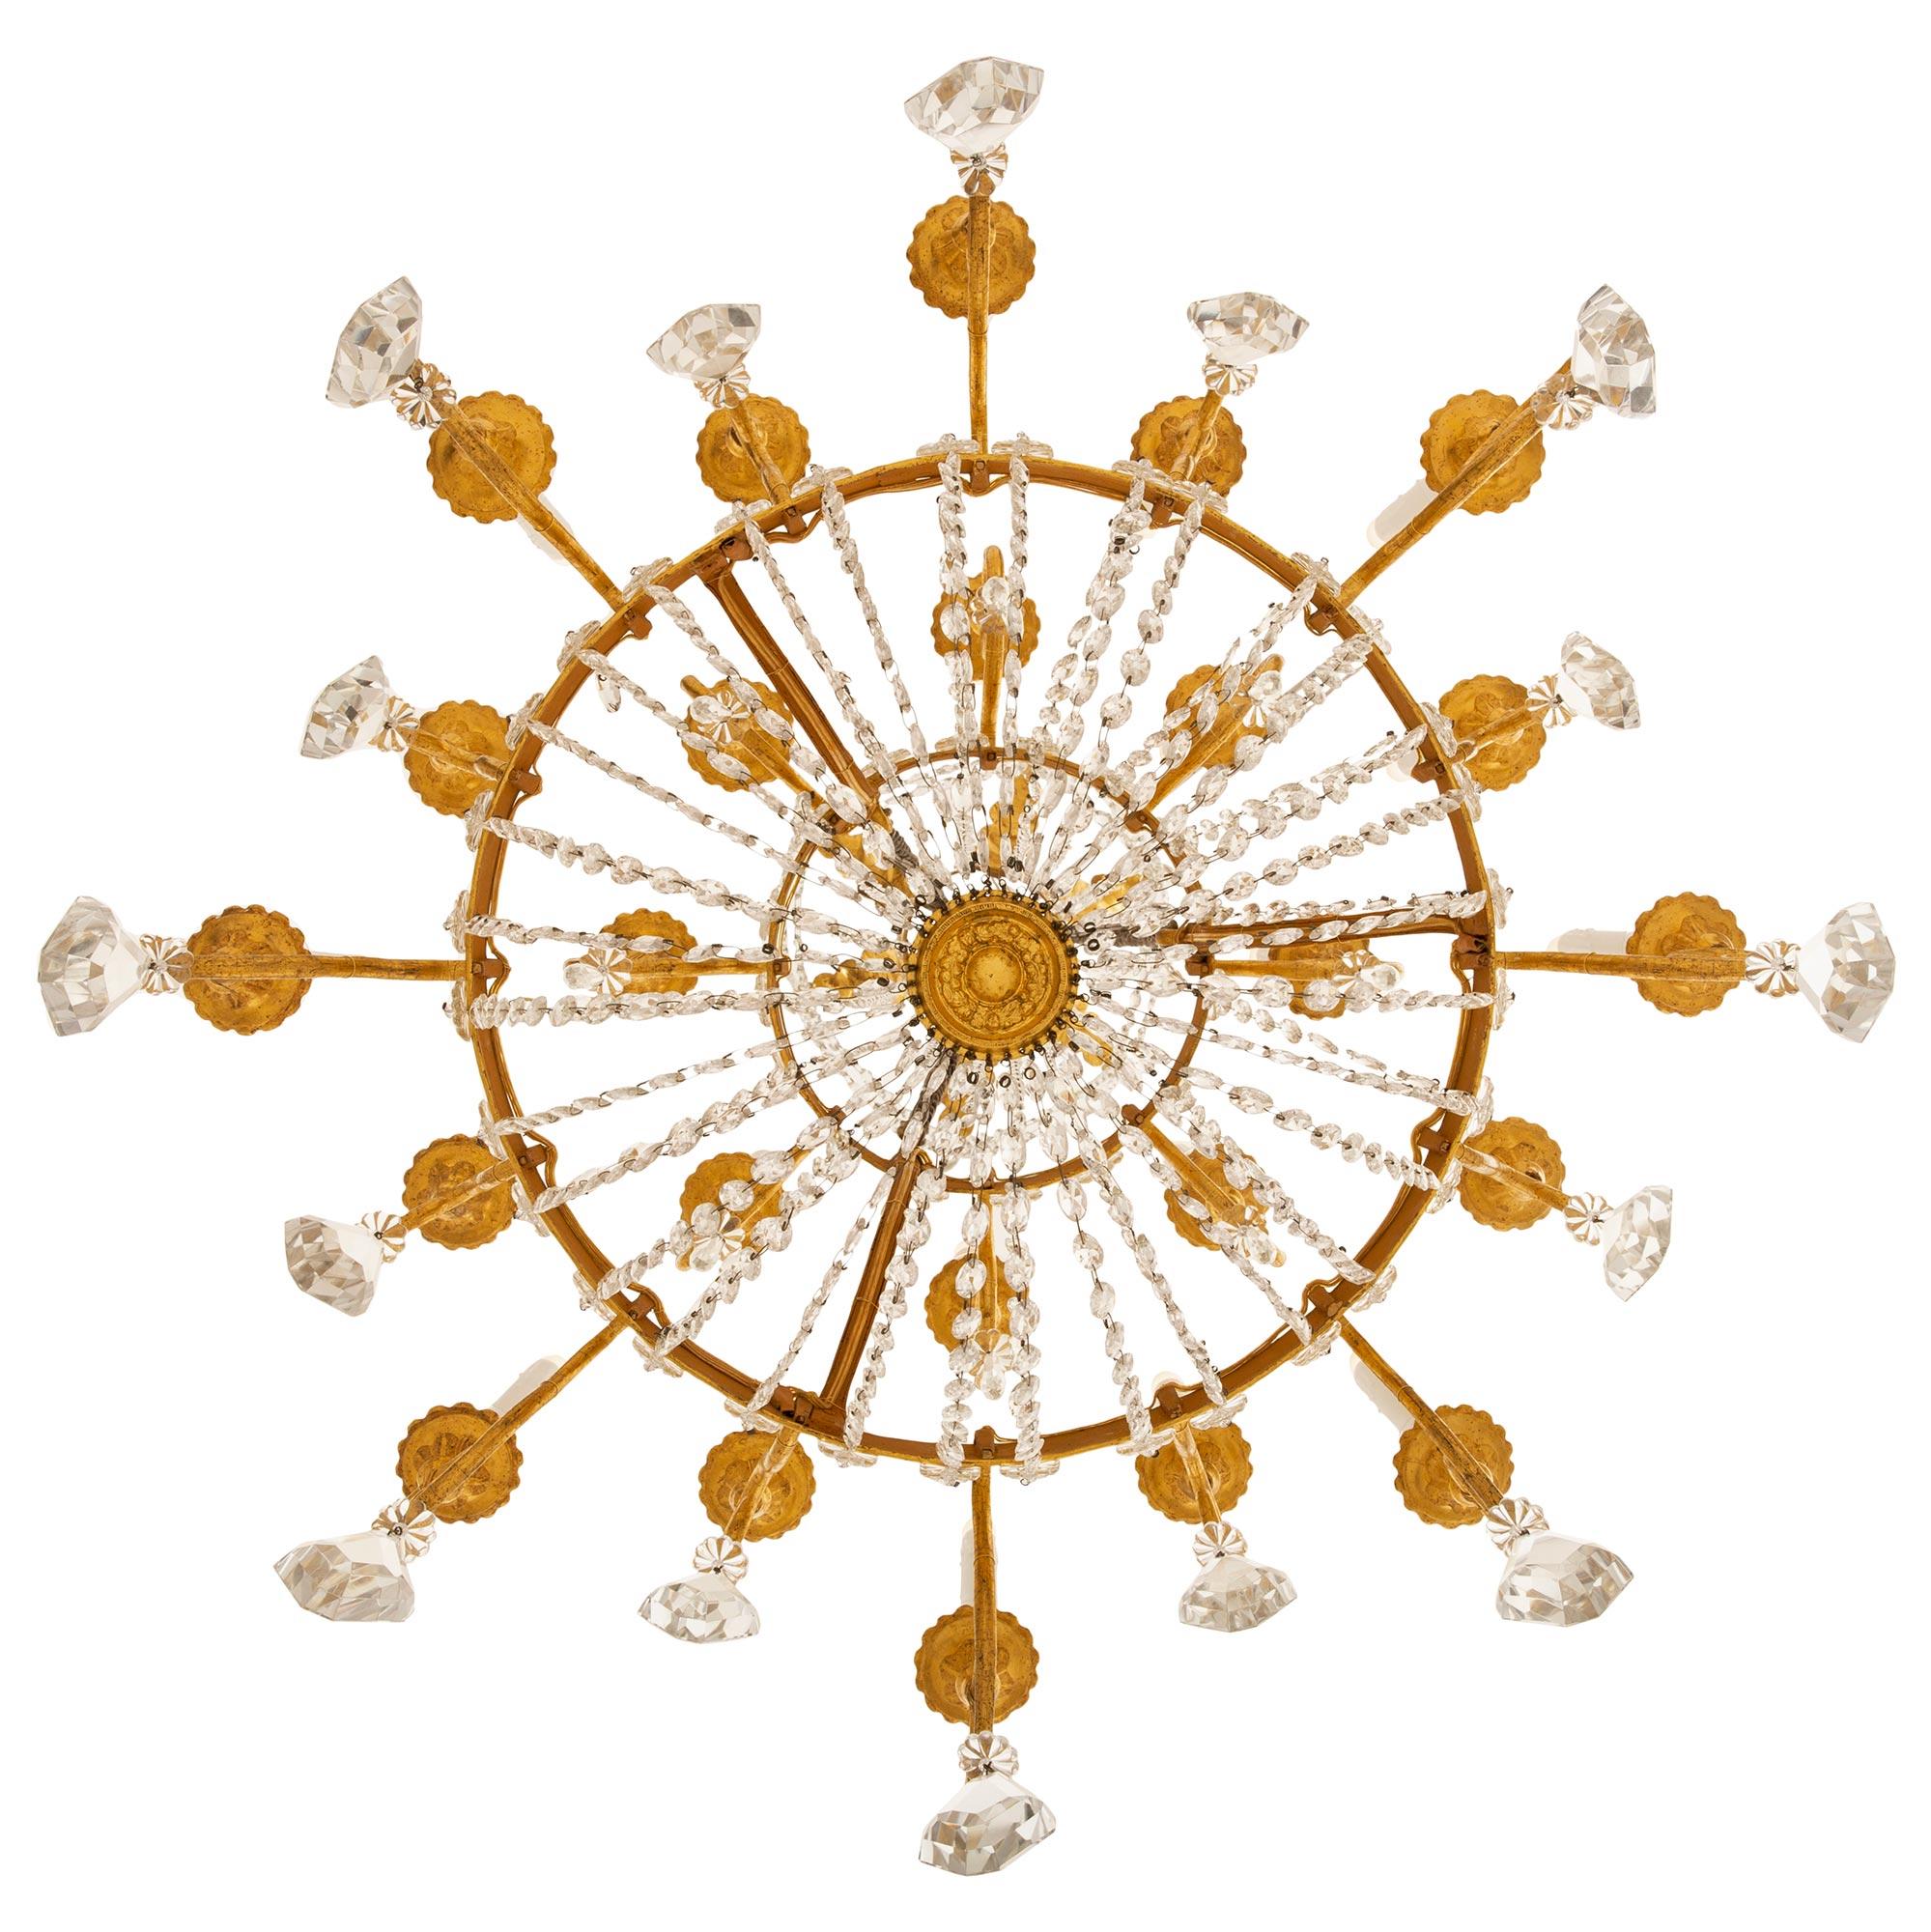 Italian 19th Century Neo-Classical St. Crystal, Giltwood & Iron Chandelier  For Sale 2